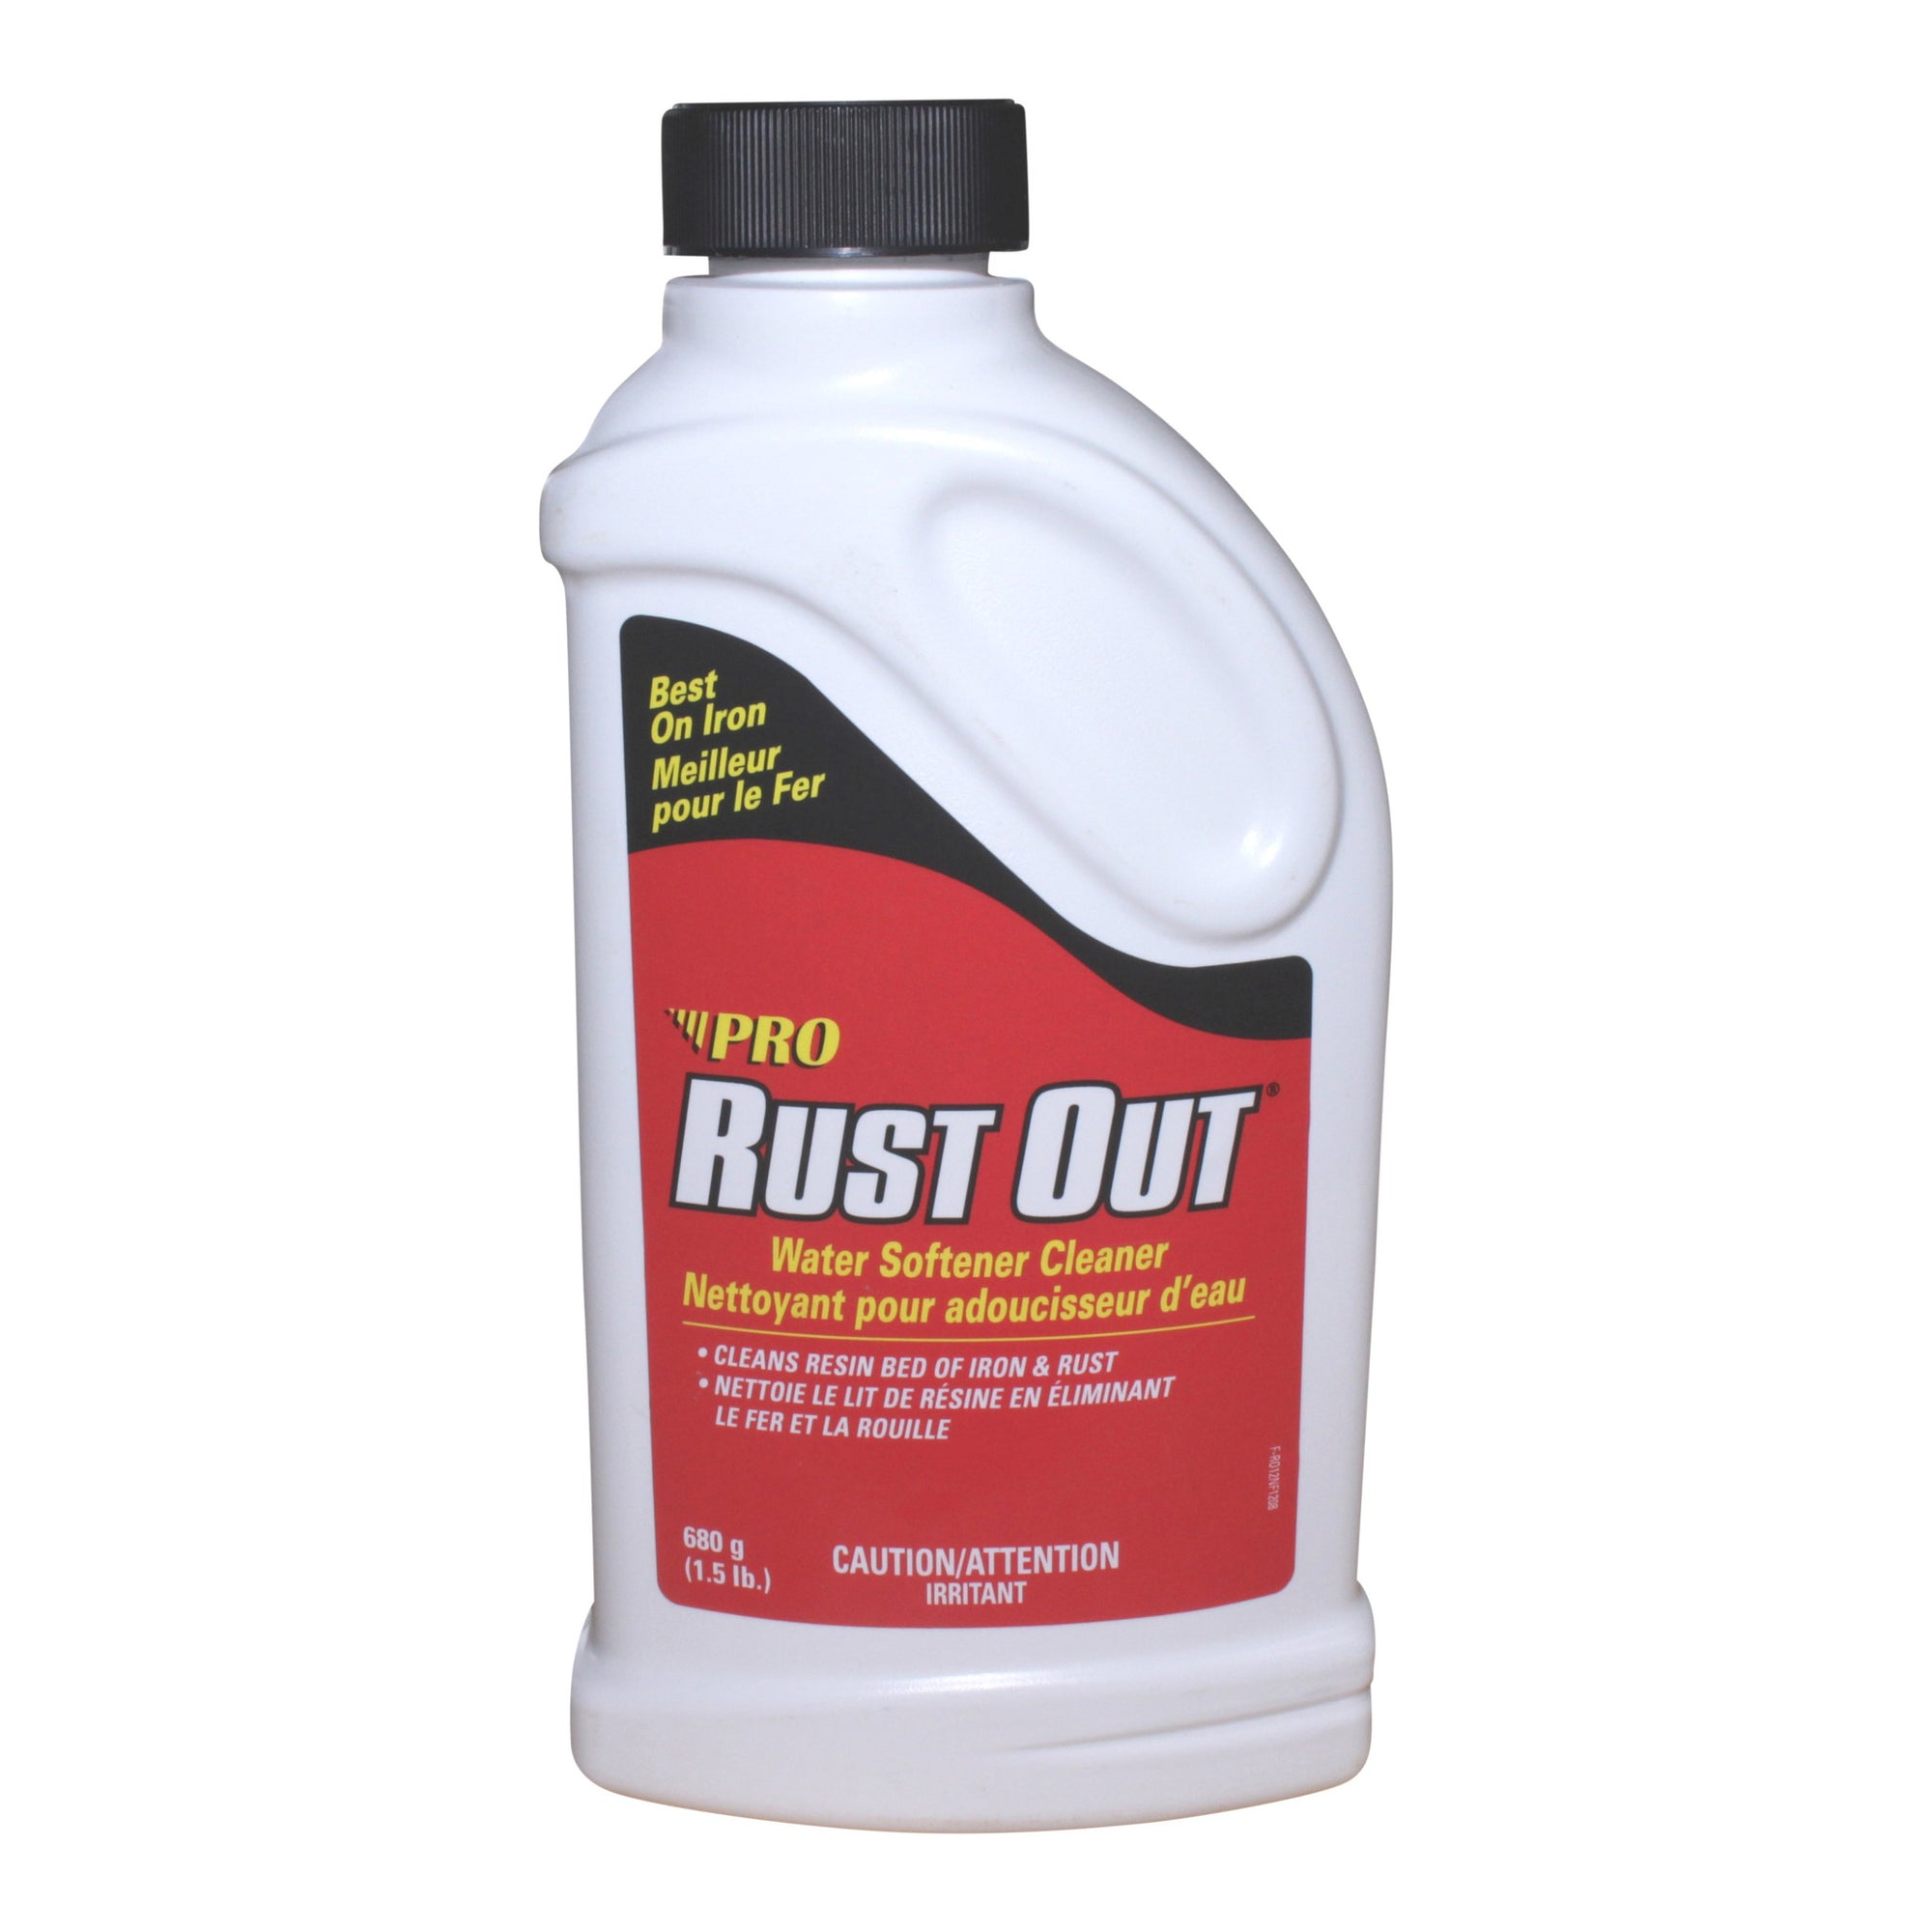 Pro Rust Out Water Softener Cleaner 680g